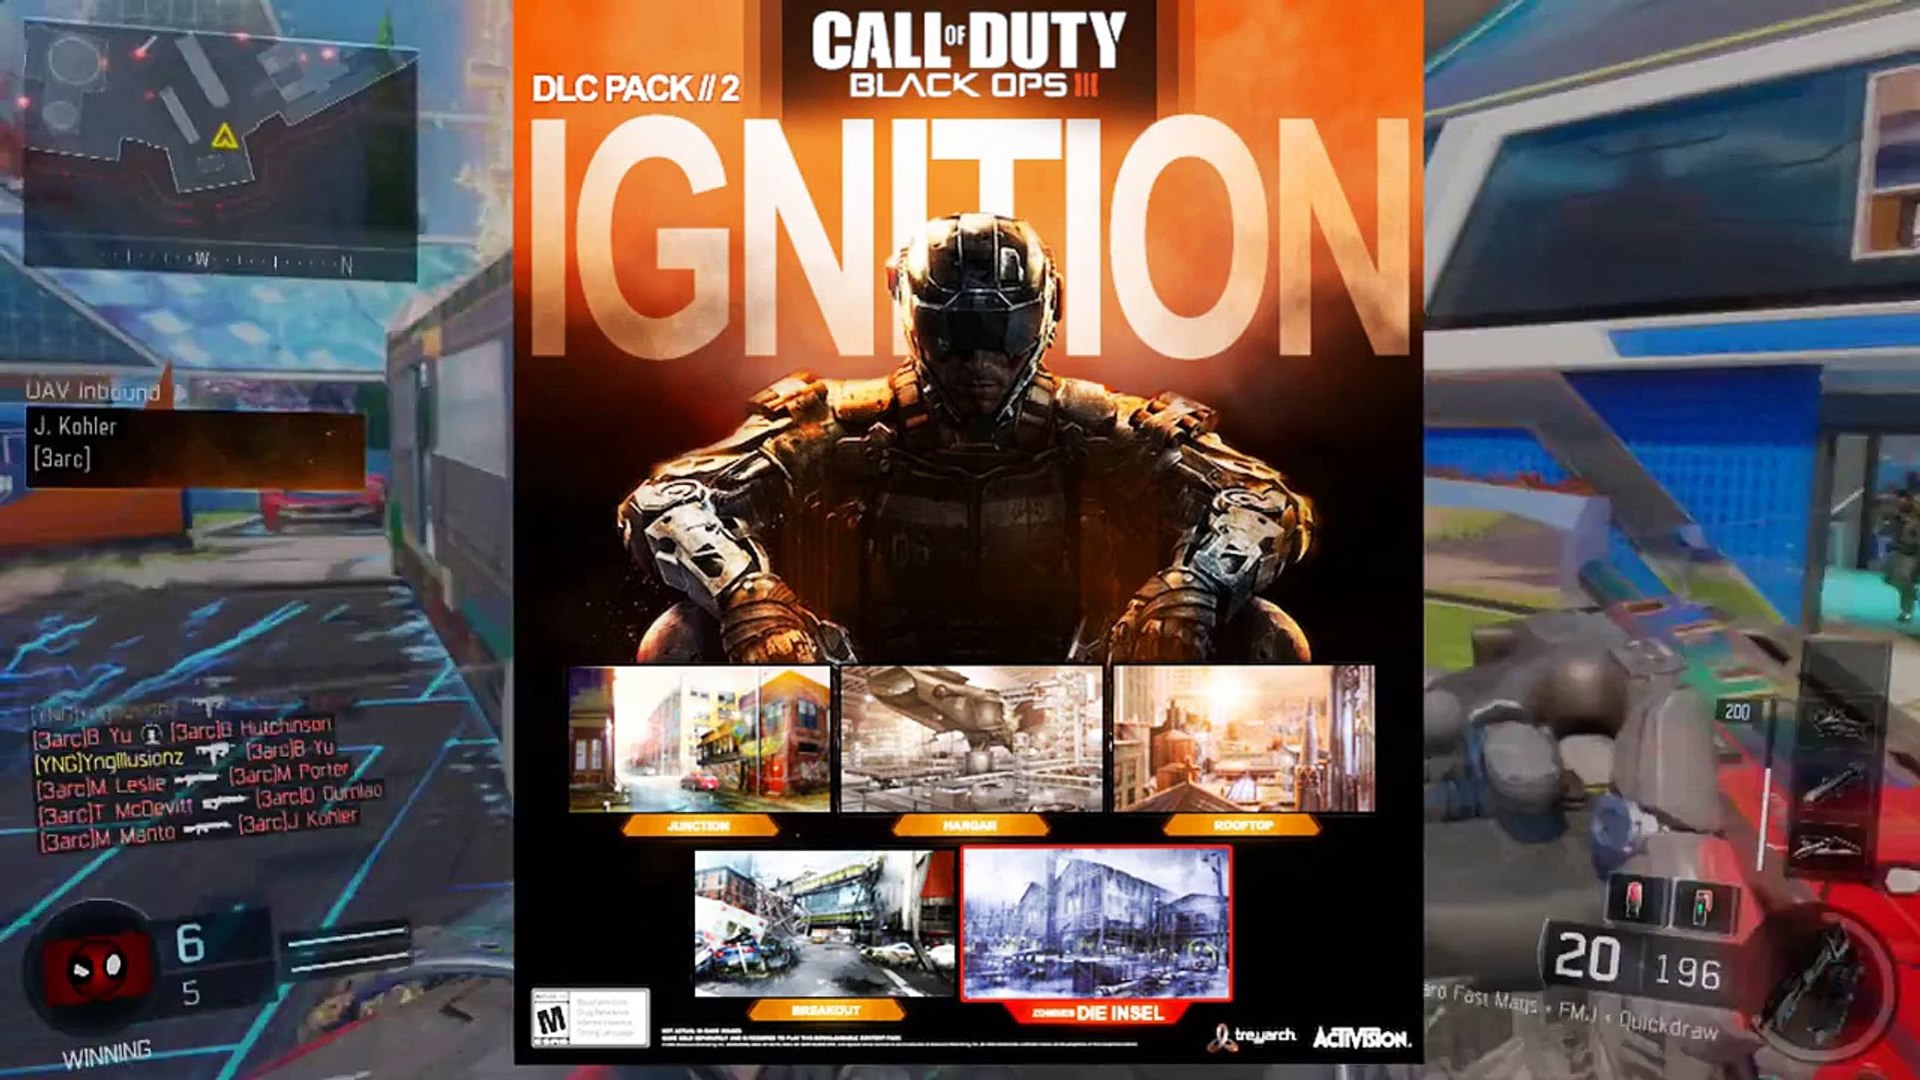 Ignition Dlc 2 In Black Ops 3 Dlc 2 Multiplayer Zombie Maps Revealed Video Dailymotion